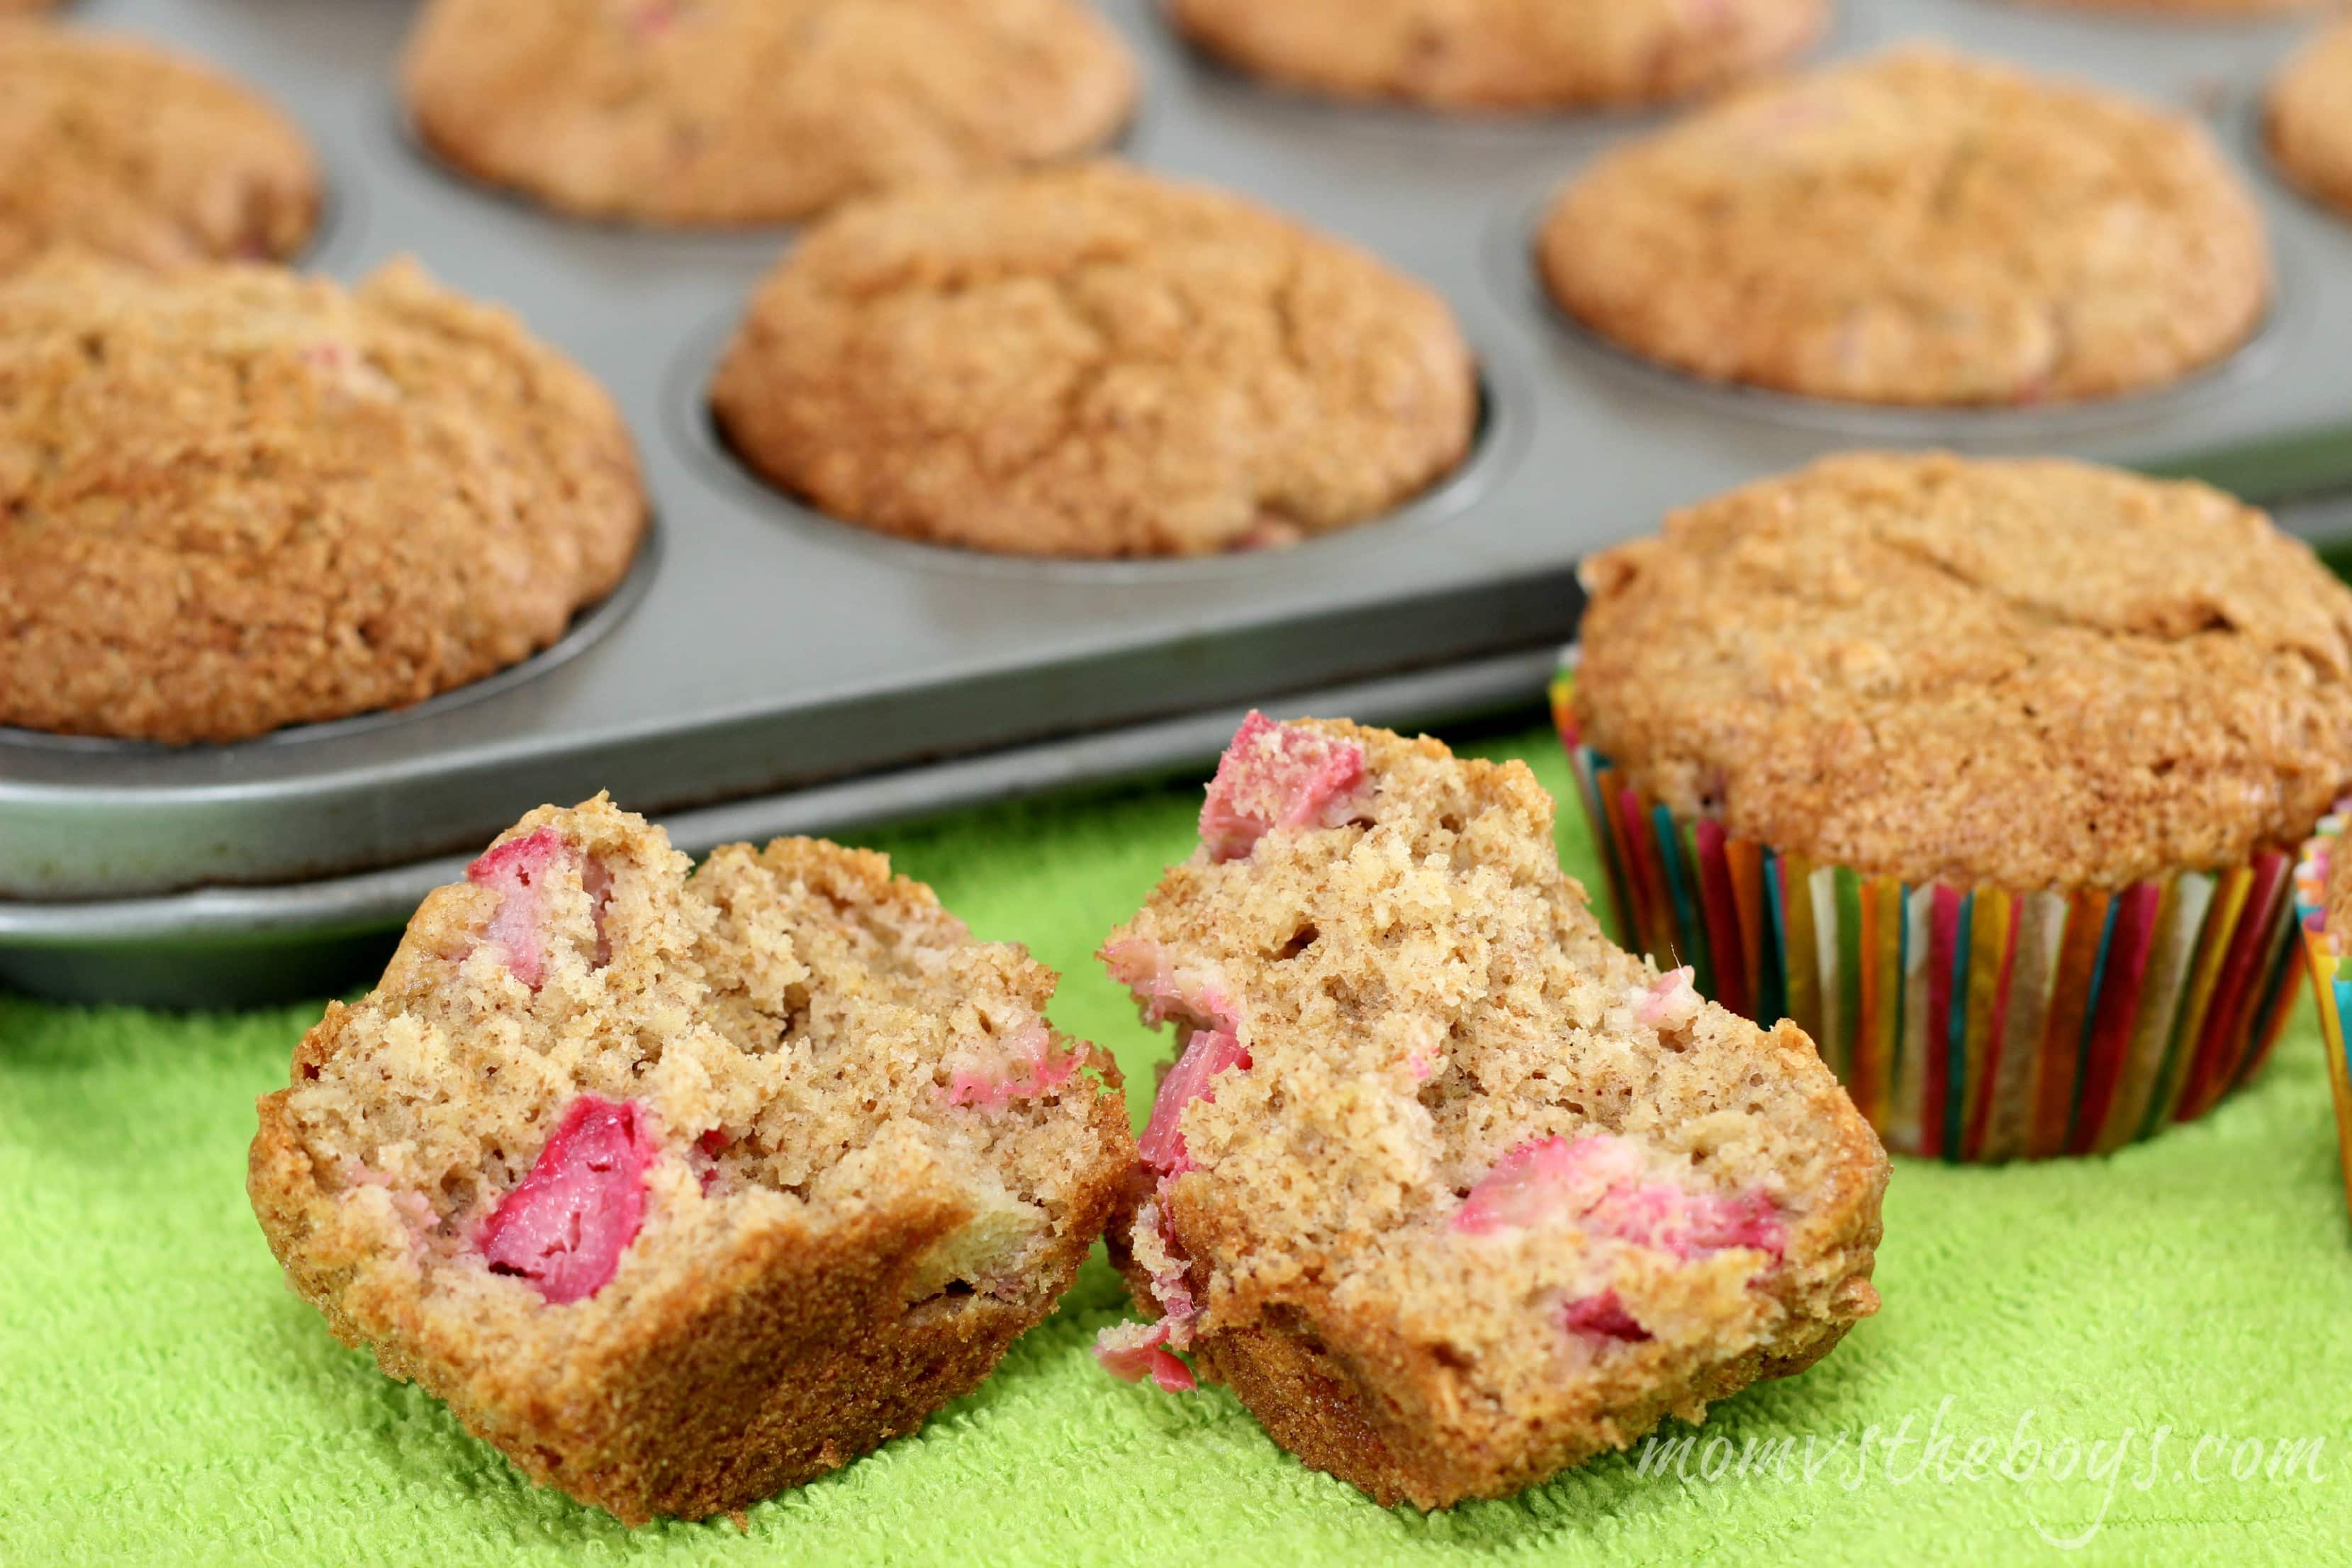 Delicious Whole Wheat Rhubarb Muffins - Mom vs the Boys